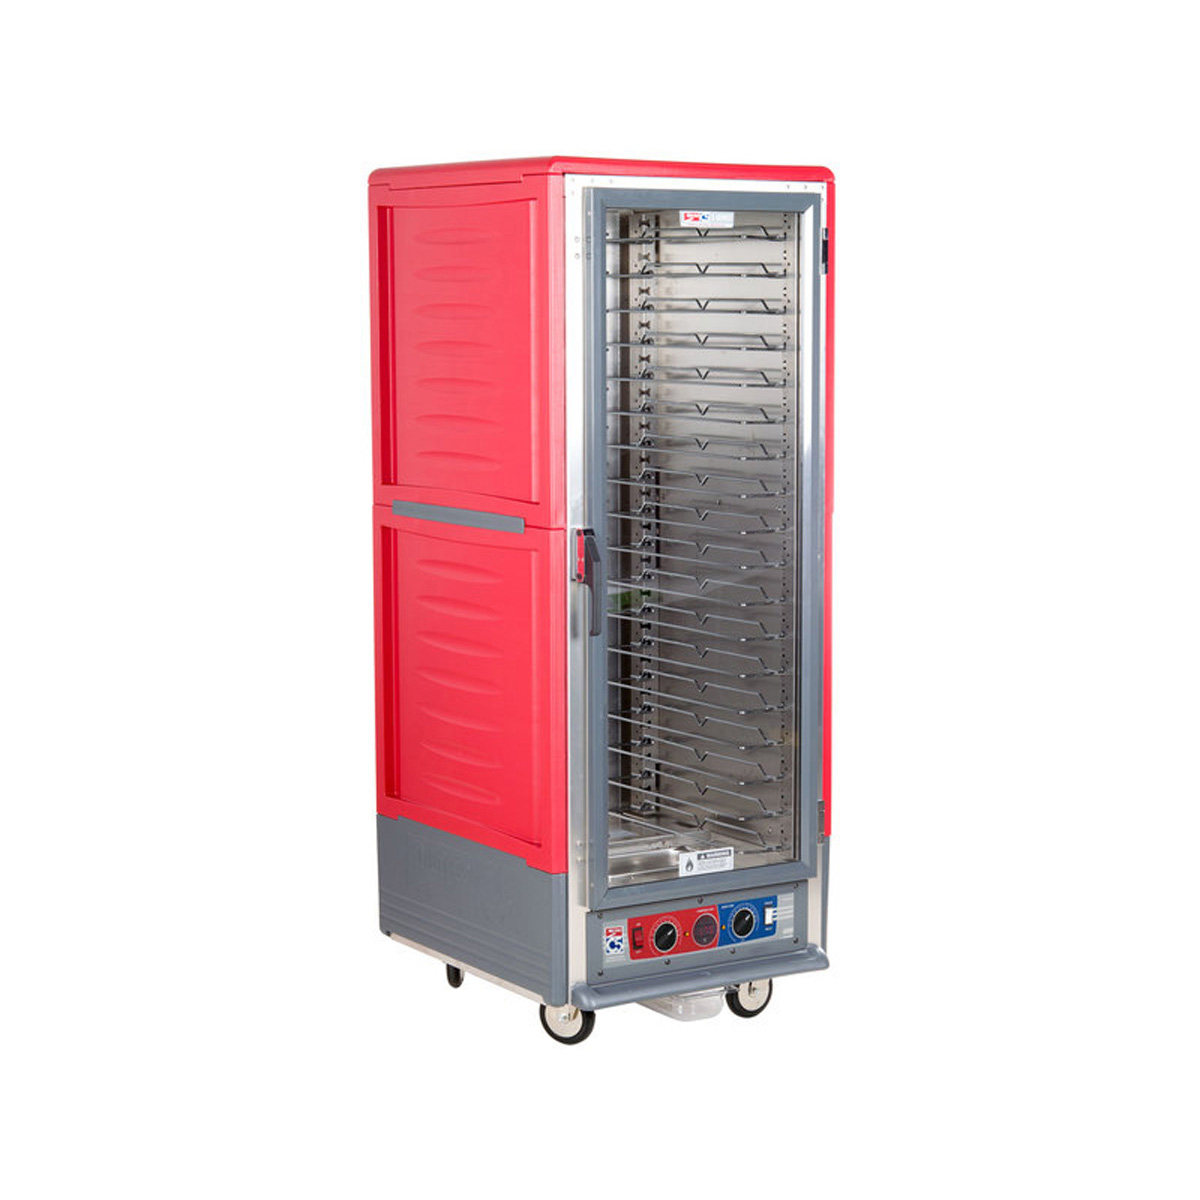 Metro C539-CLFC-U C5 3 Series Insulated Mobile Proofing and Holding Cabinet